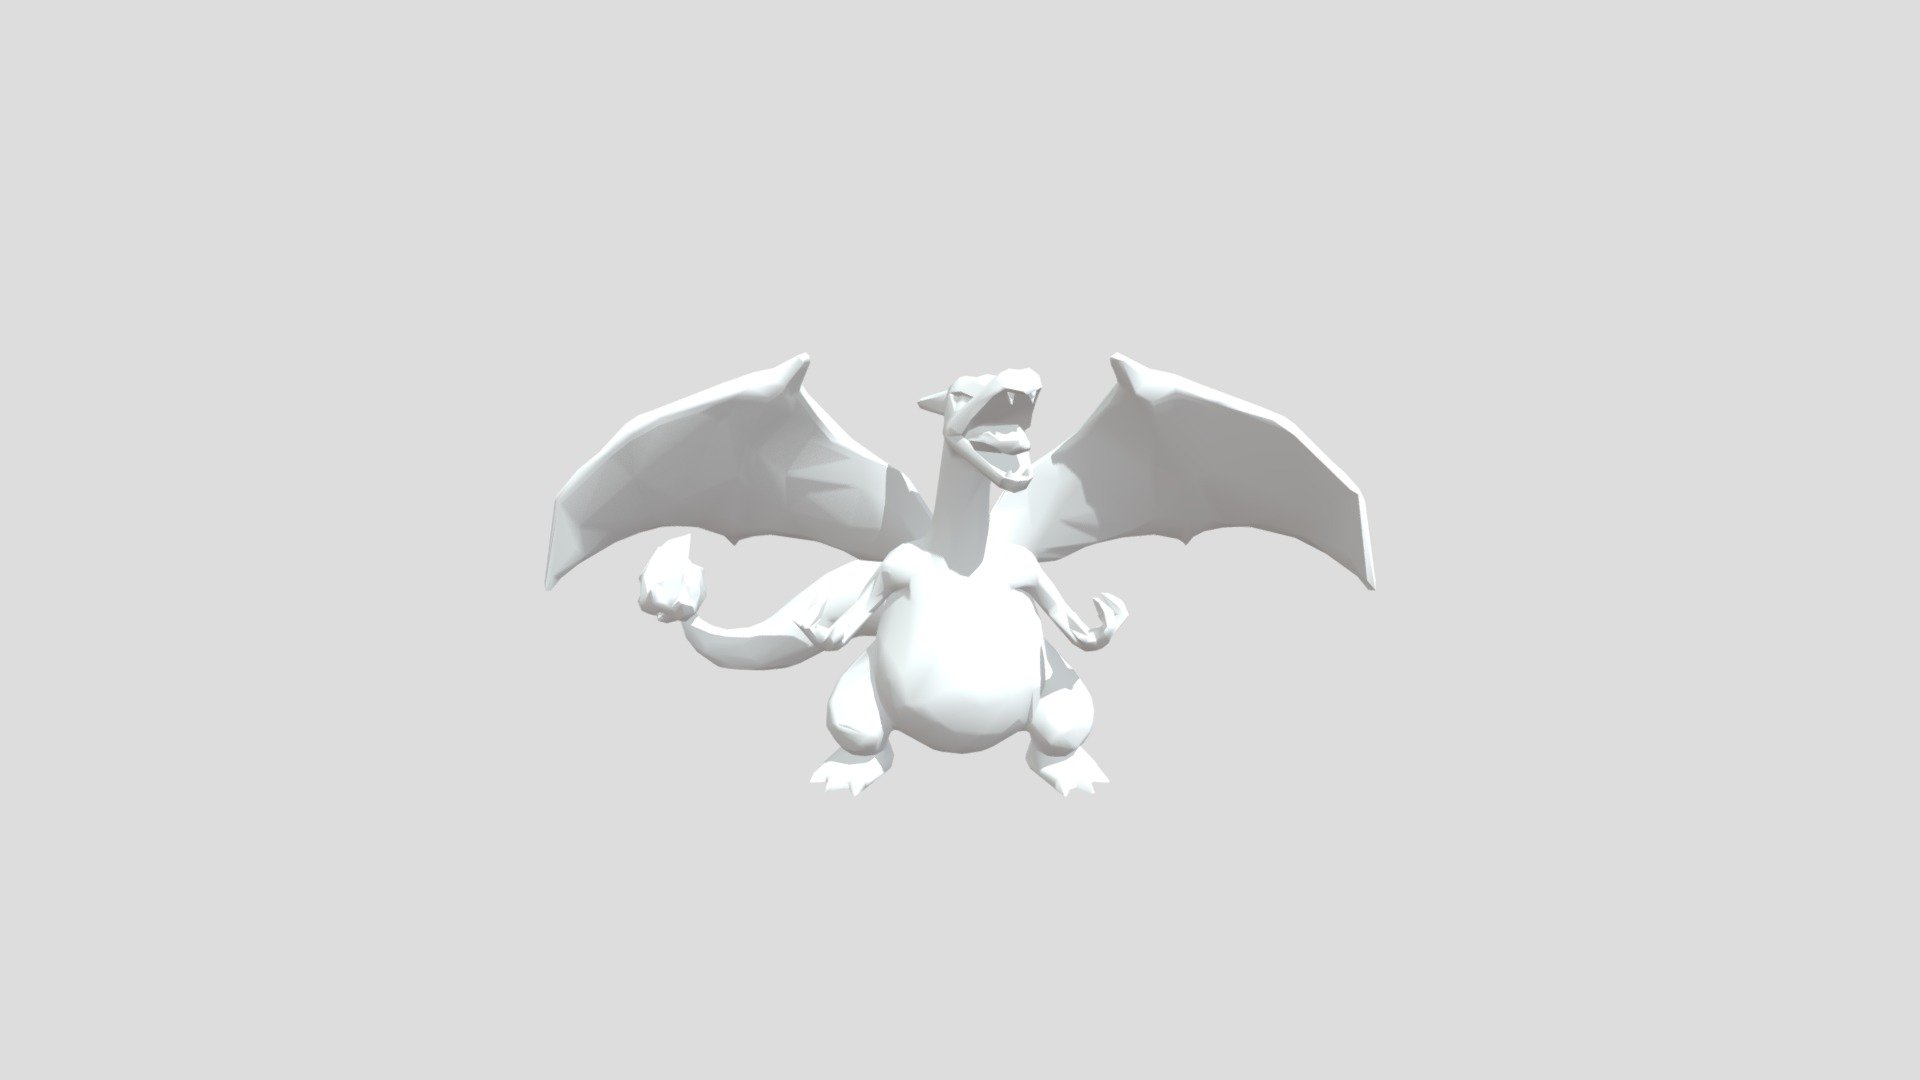 Dragon 2*3 inches does not require any support https://www.c3d.ae/ contact for more details - CHARIZARD LOW POLY - 3D model by C3D 3D Printing (@johnuae3d) 3d model